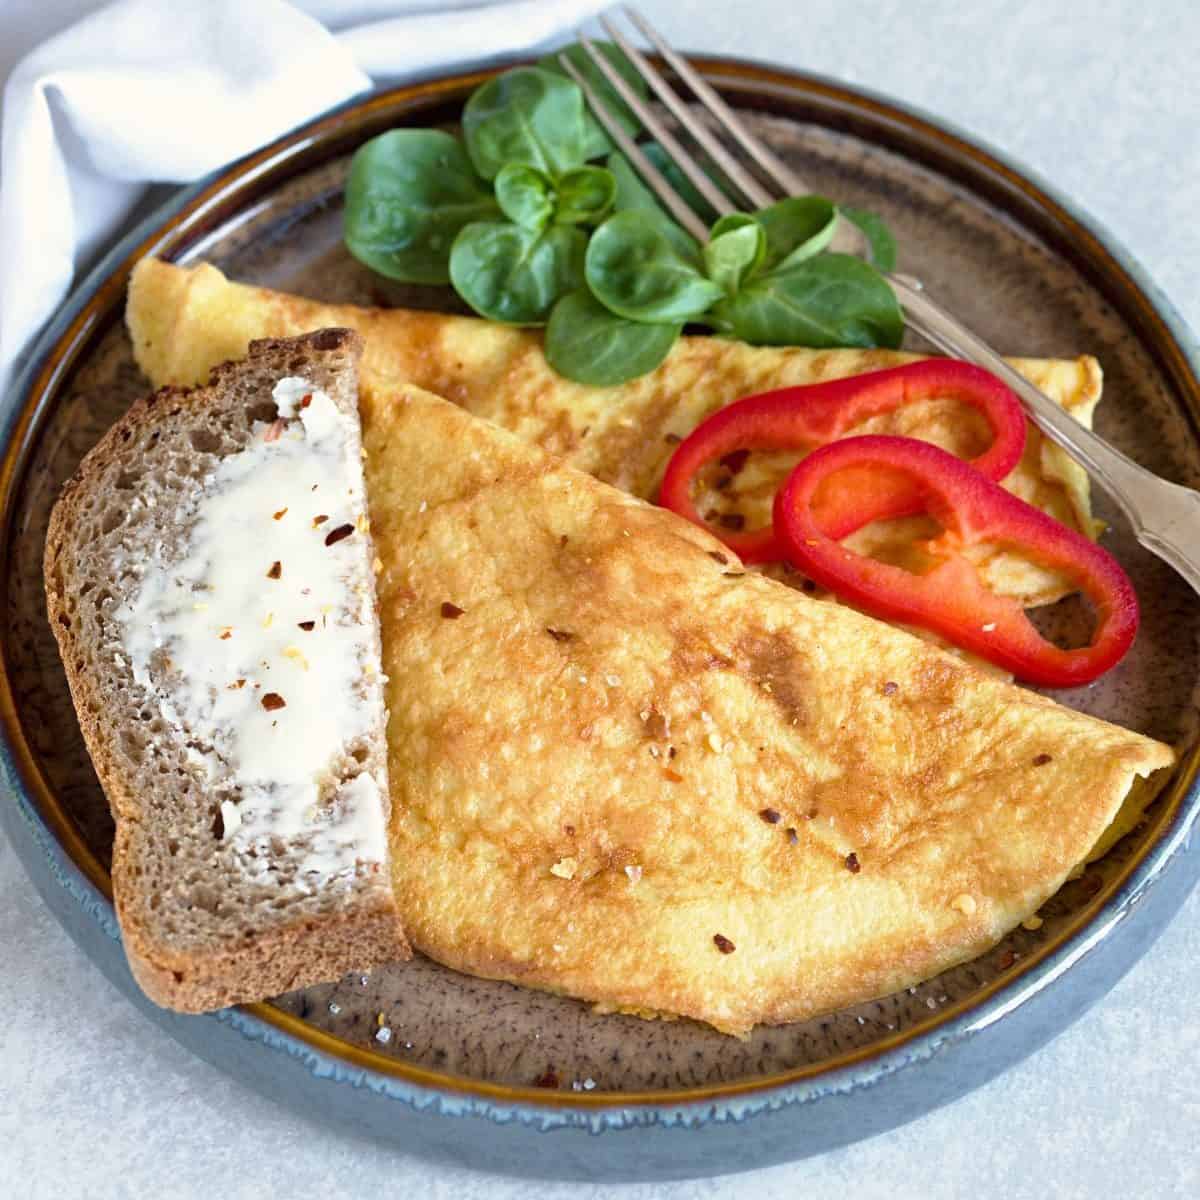 Fluffy omelette served with vegetables and buttery bread.